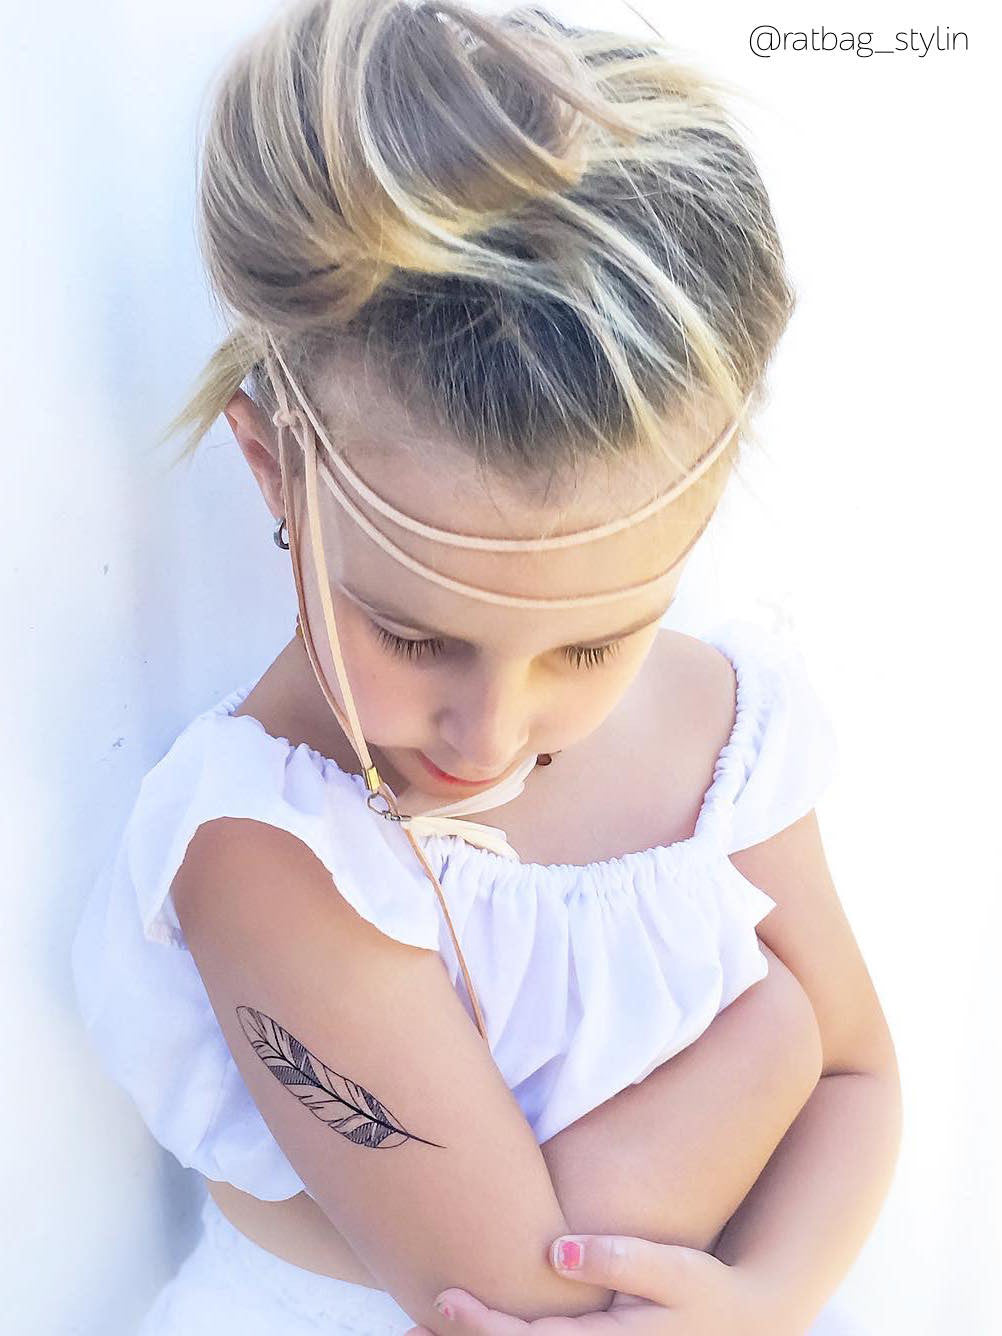 Black feather bohemian temporary tattoo for boho girls from Feathers and arrows big fake tattoos set. Great wedding children's table filler from Ducky street. 